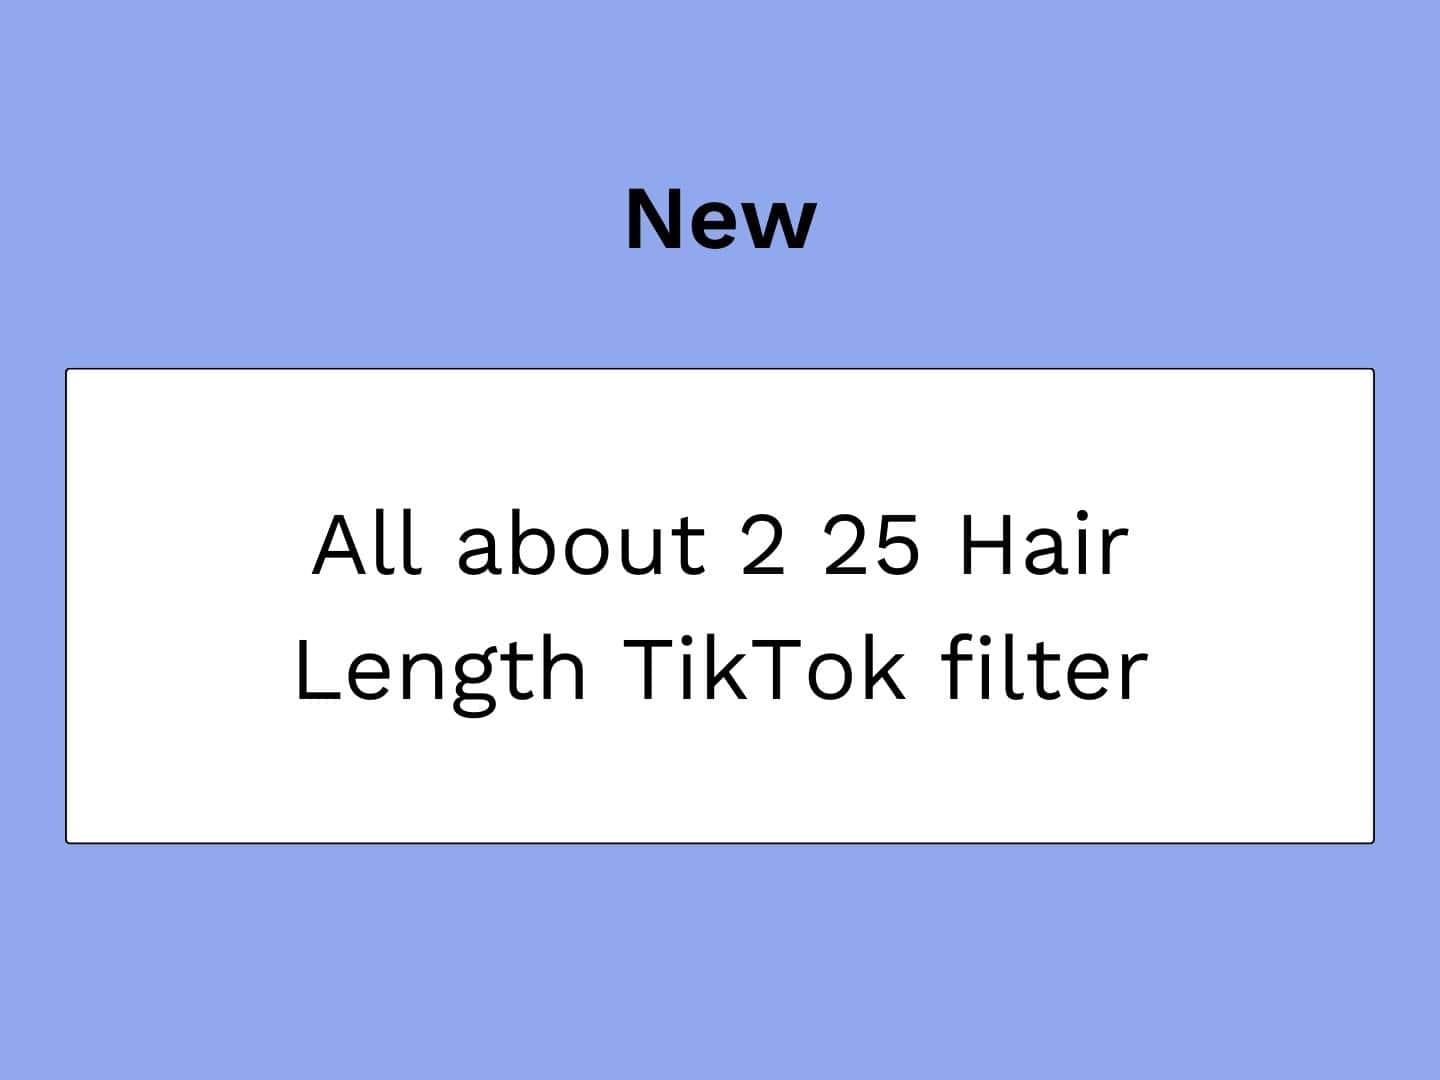 TikTok's 2.25 Hair Length Filter Is Going Viral — But Is It Accurate?